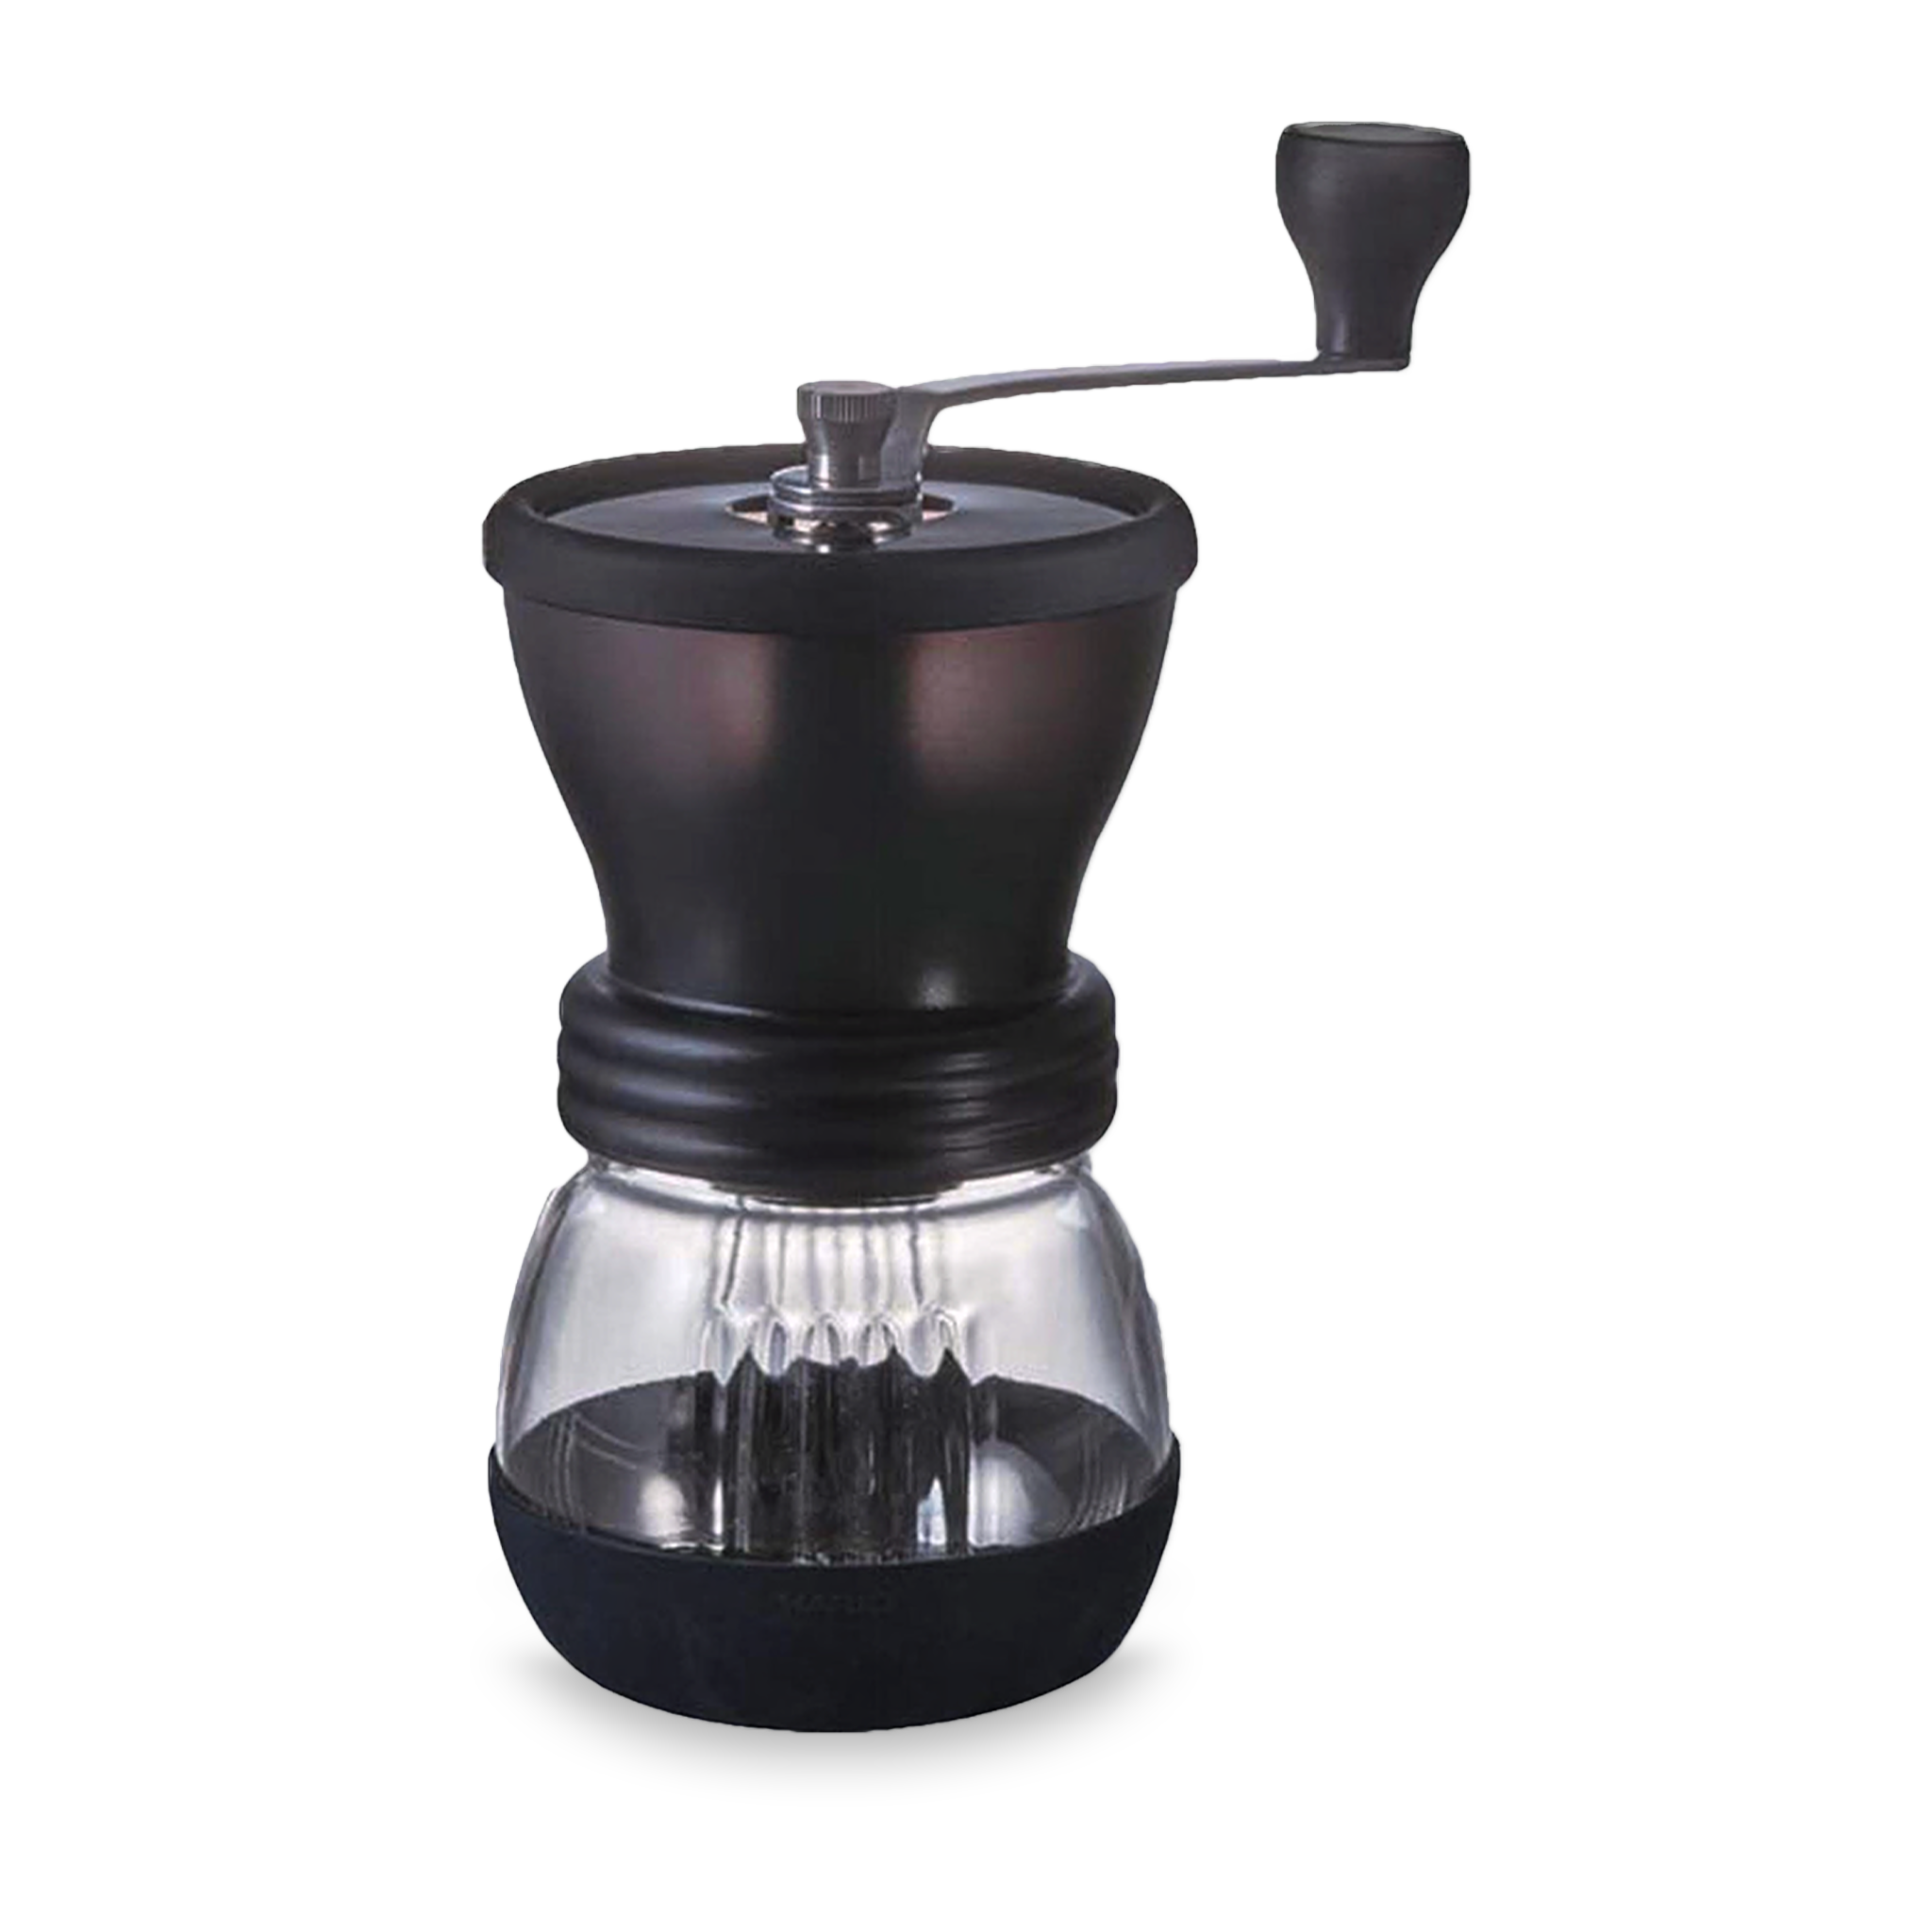 https://www.dancinggoats.com/cdn/shop/products/BB_PRODUCT_Hario-Skerton-Plus-Coffee-Grinder_TL-4011_PRIMARY_2048x.png?v=1622067695